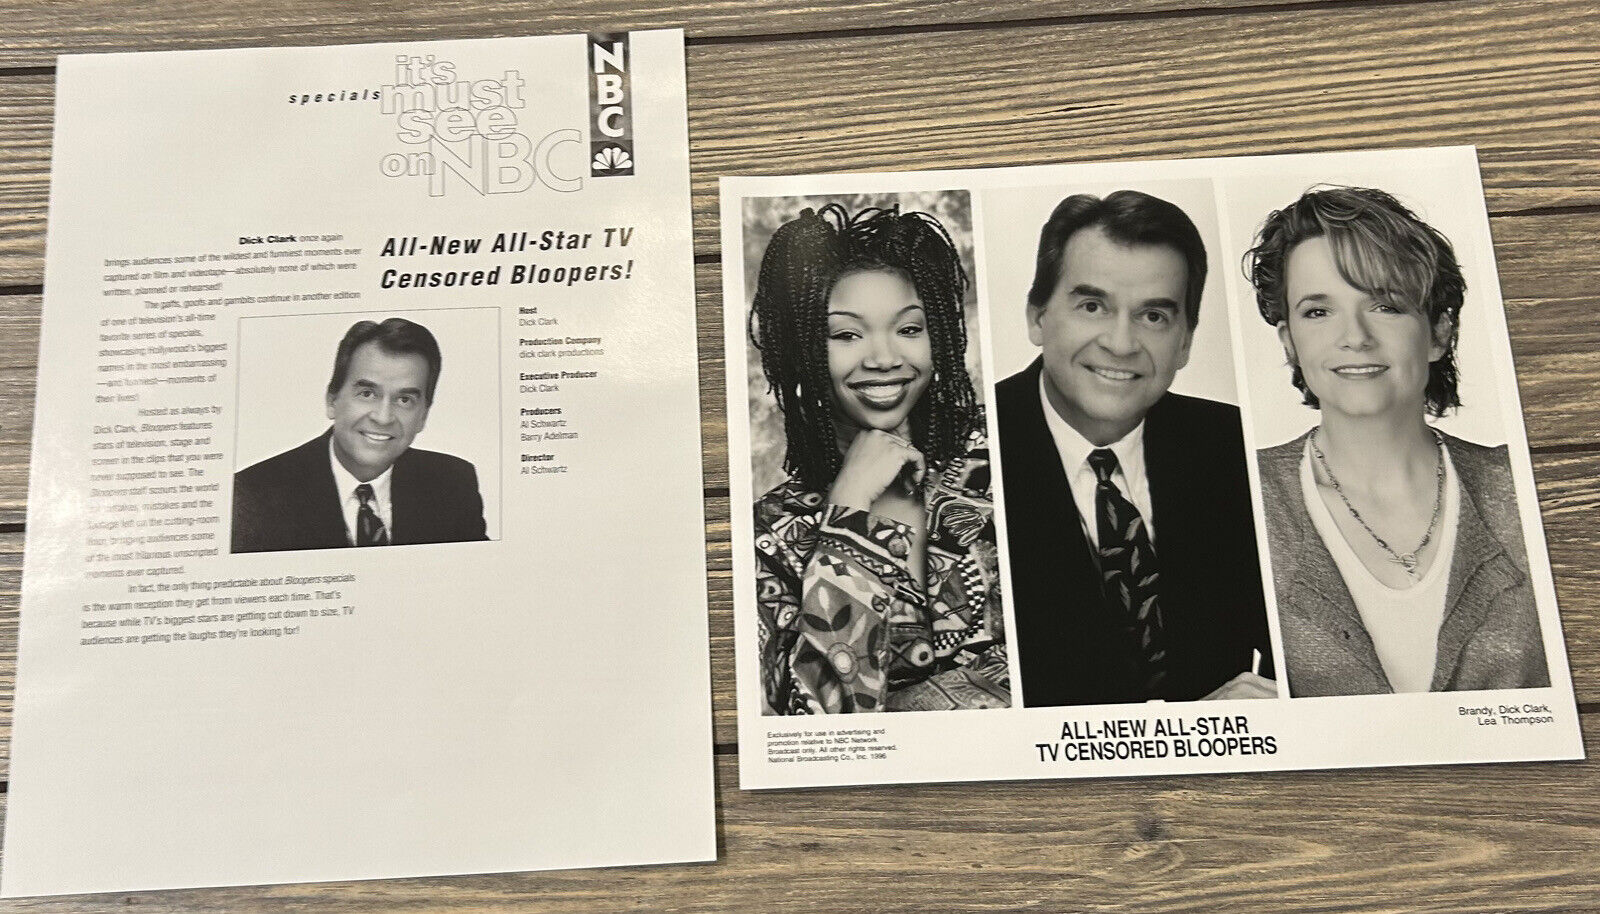 Vintage NBC Specials All New All Star TV Censored Bloopers Photo Fact Sheet 